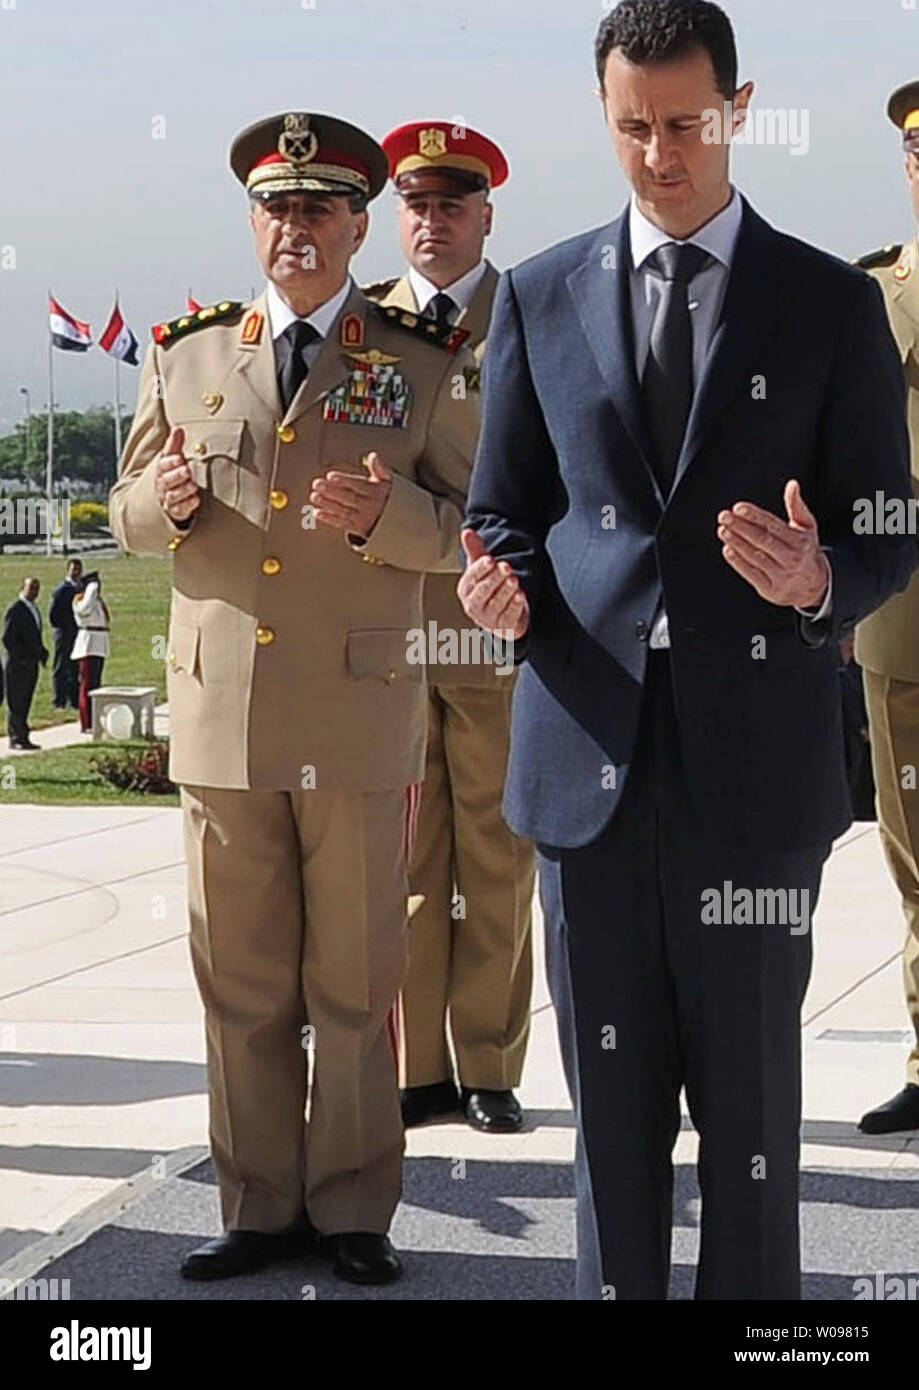 A picture dated May 6, 2011 and released by the Syrian Arab News Agency (SANA) shows Syrian President Bashar al-Assad (R) and Minister of Defense, Lieutenant General Daoud Rajha (L), attending a ceremony at the tomb of the unknown soldier in Damascus. Syrian President Bashar al-Assad appointed Freij as the new defence minister on July 18, 2012, after Rajha was killed the same day in a suiicde bomb blast that killed two top regime officials. UPI Stock Photo